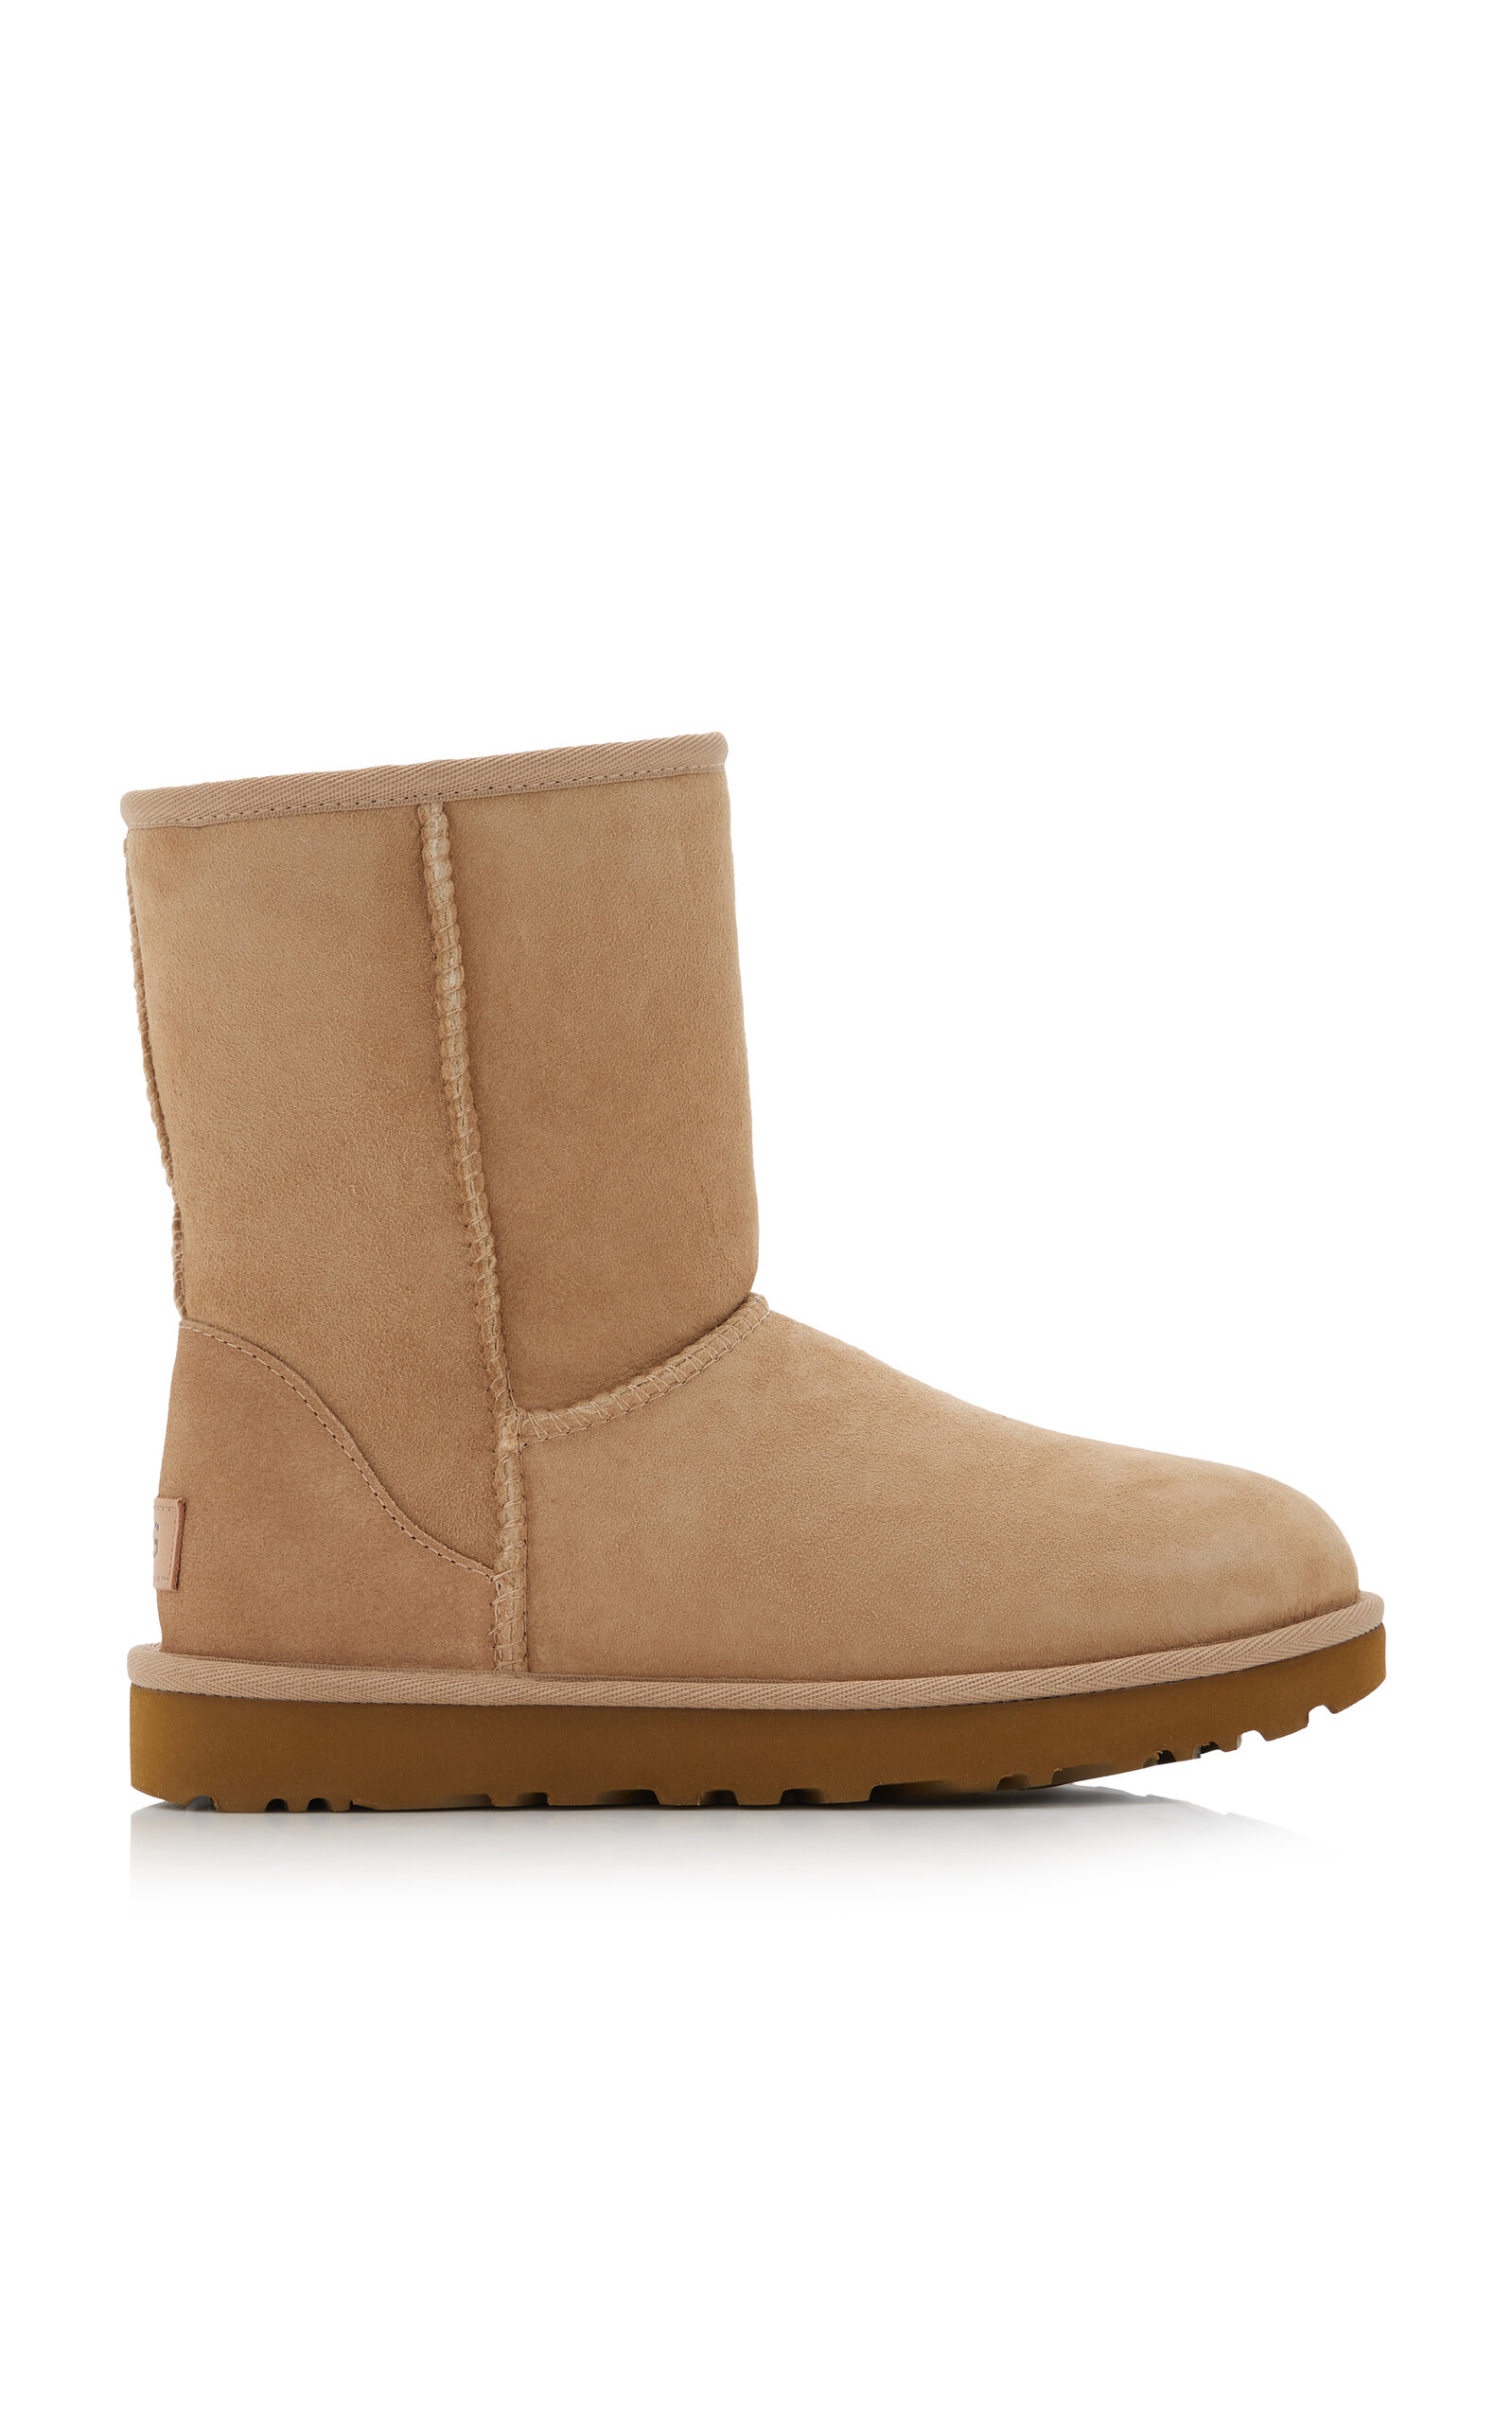 Ugg Classic Short Ii Sheepskin Ankle Boots In Neutral